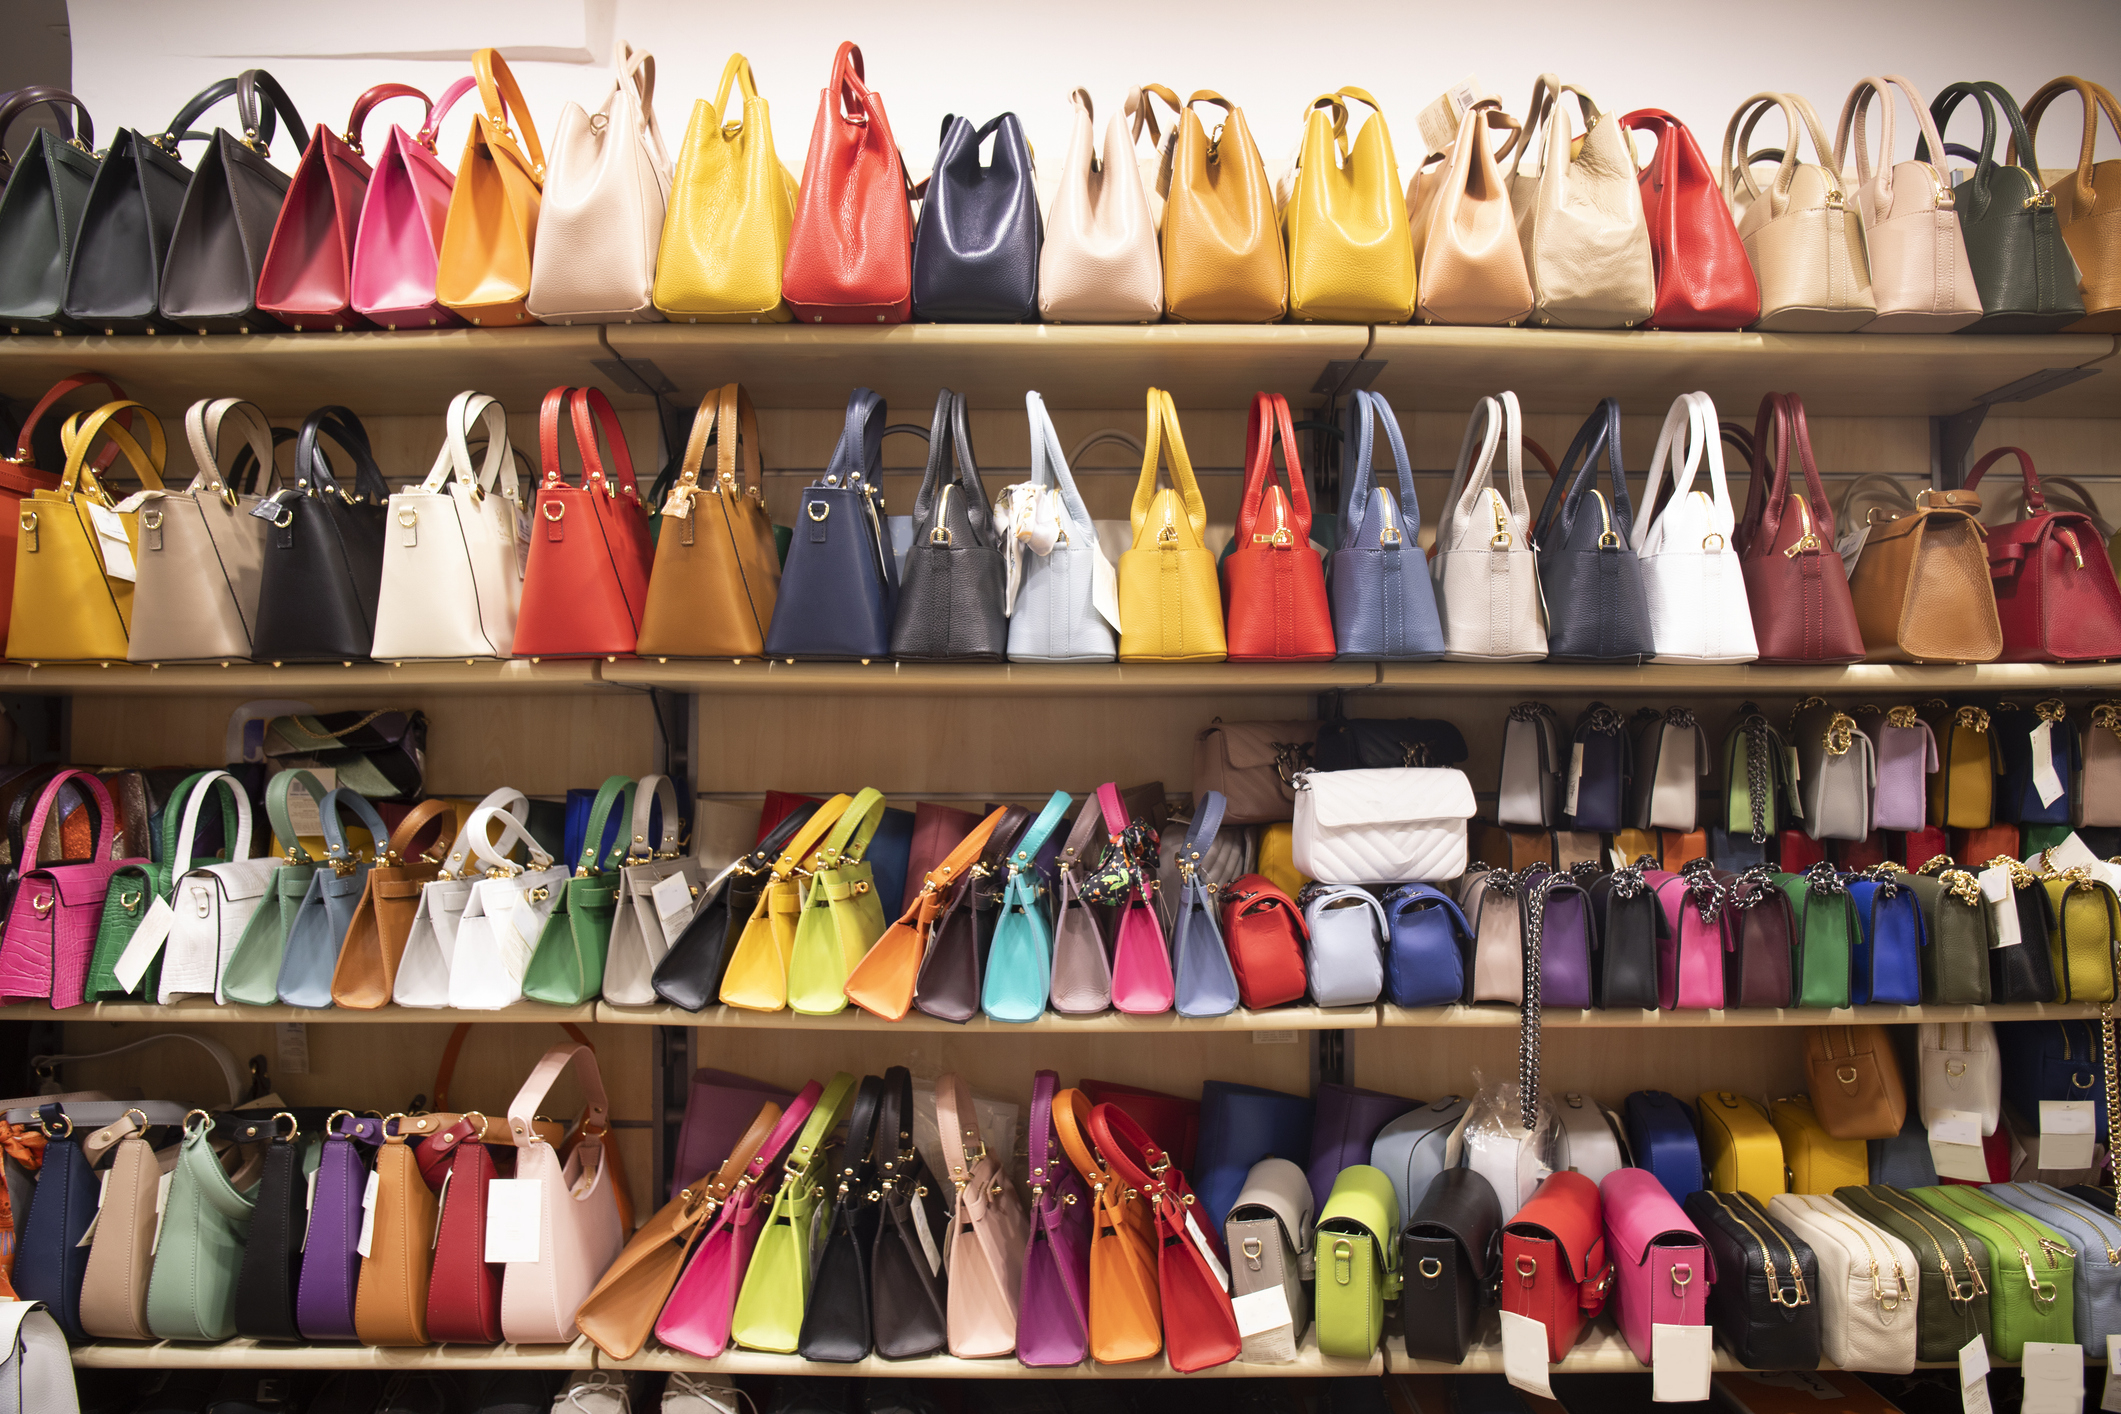 Shelves lined with a variety of handbags in multiple sizes and designs, displayed in a store setting